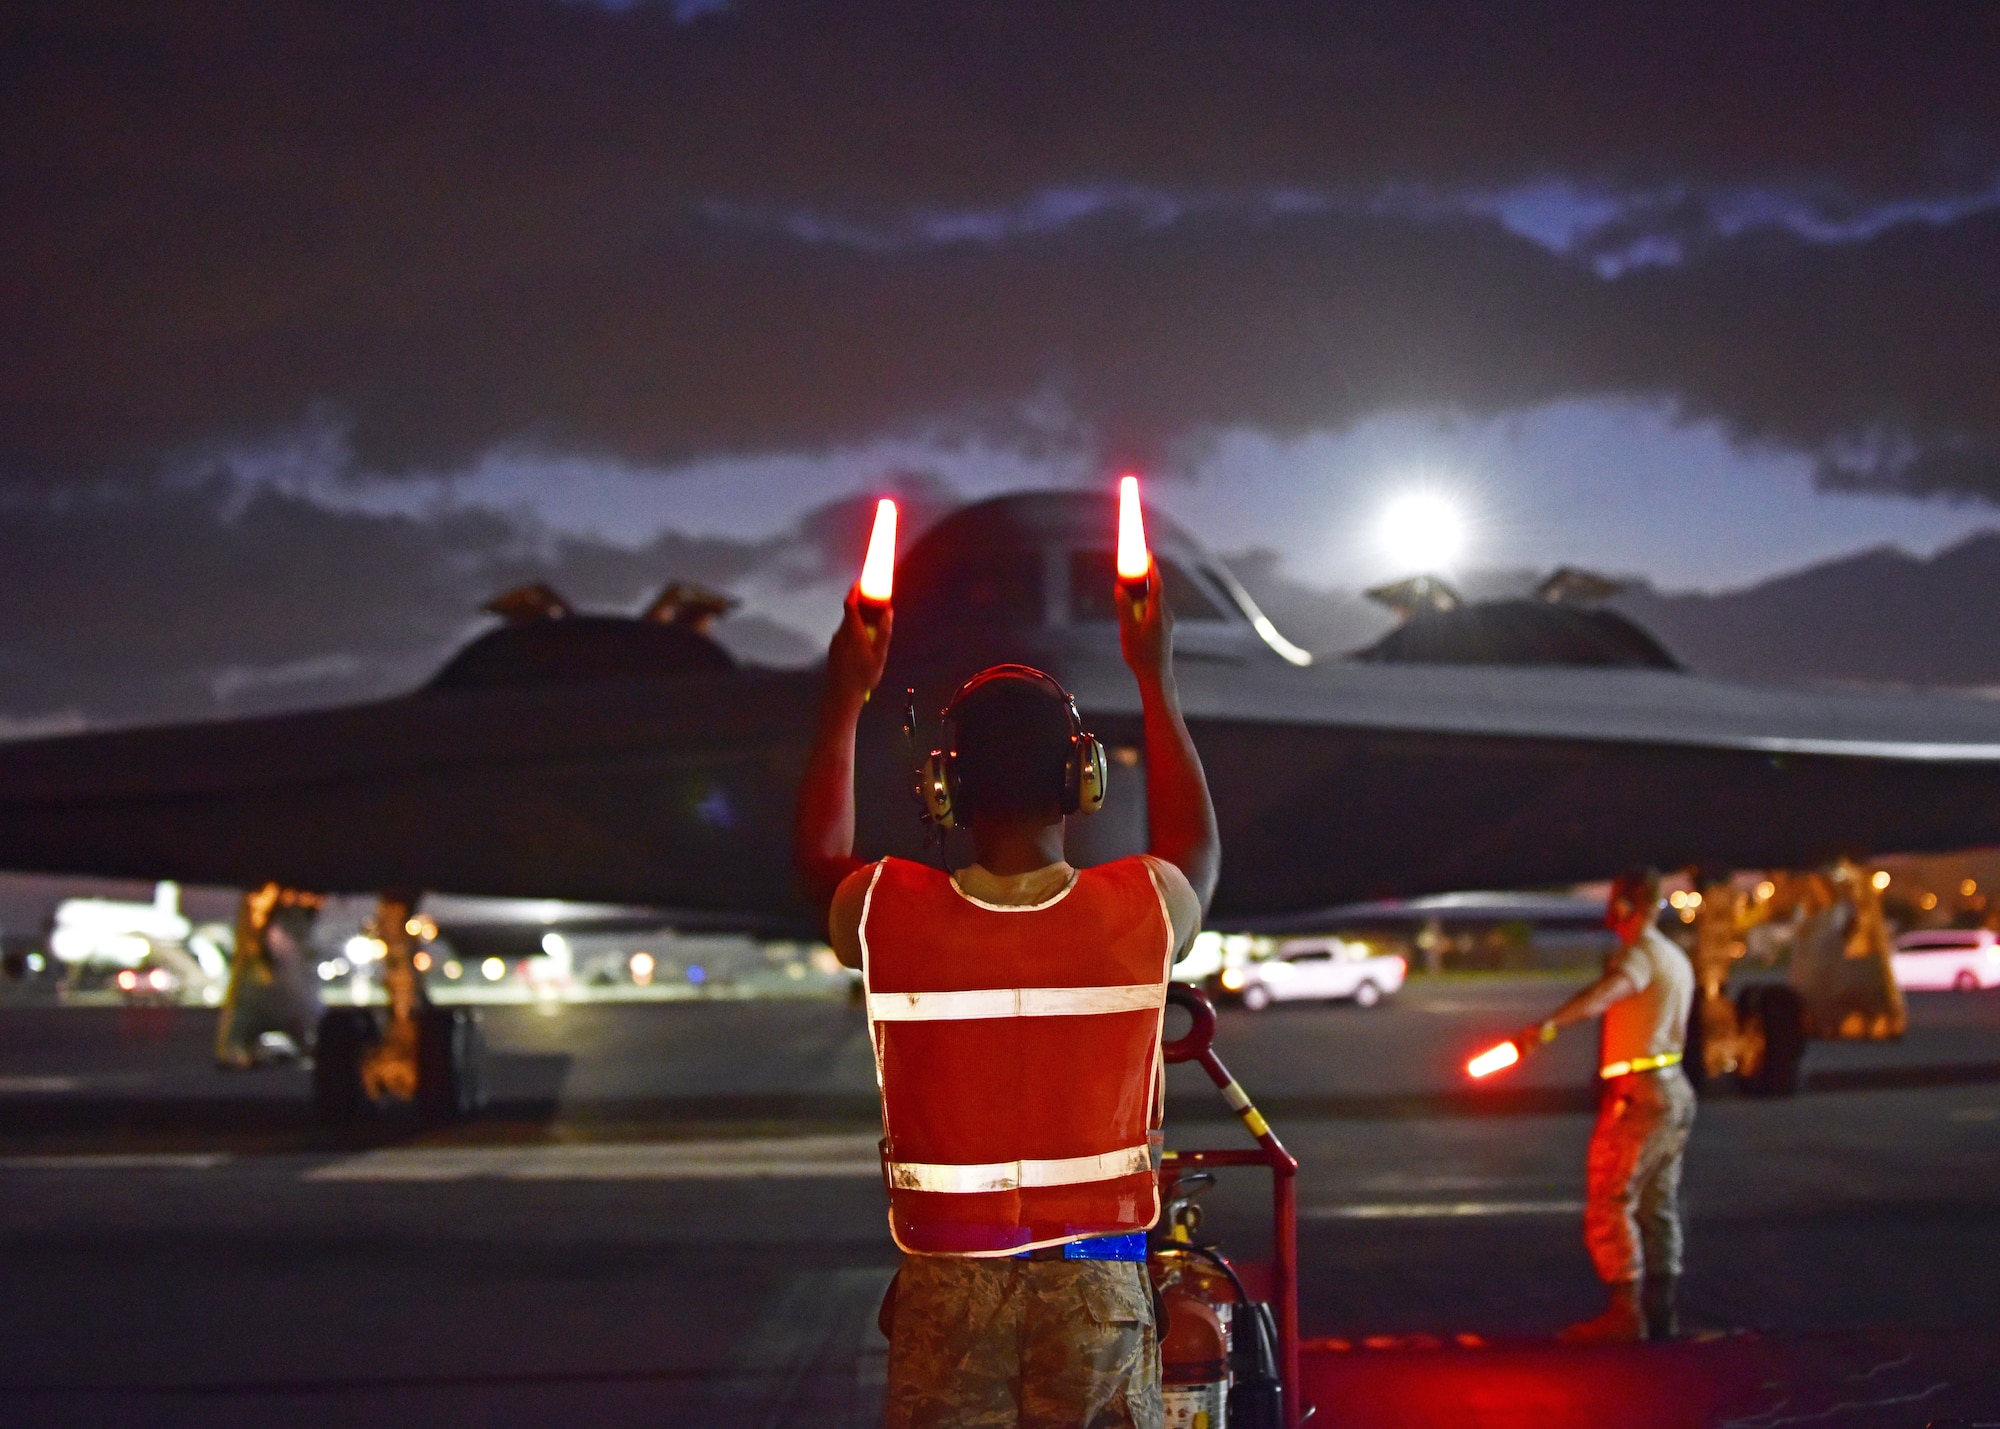 U.S. Air Force Airman 1st Class Christopher Rucker, a crew chief assigned to the 509th Aircraft Maintenance Squadron, marshals a B-2 Spirit returning from a routine training mission at Joint Base Pearl Harbor-Hickam, Hawaii, Sept. 6, 2018.